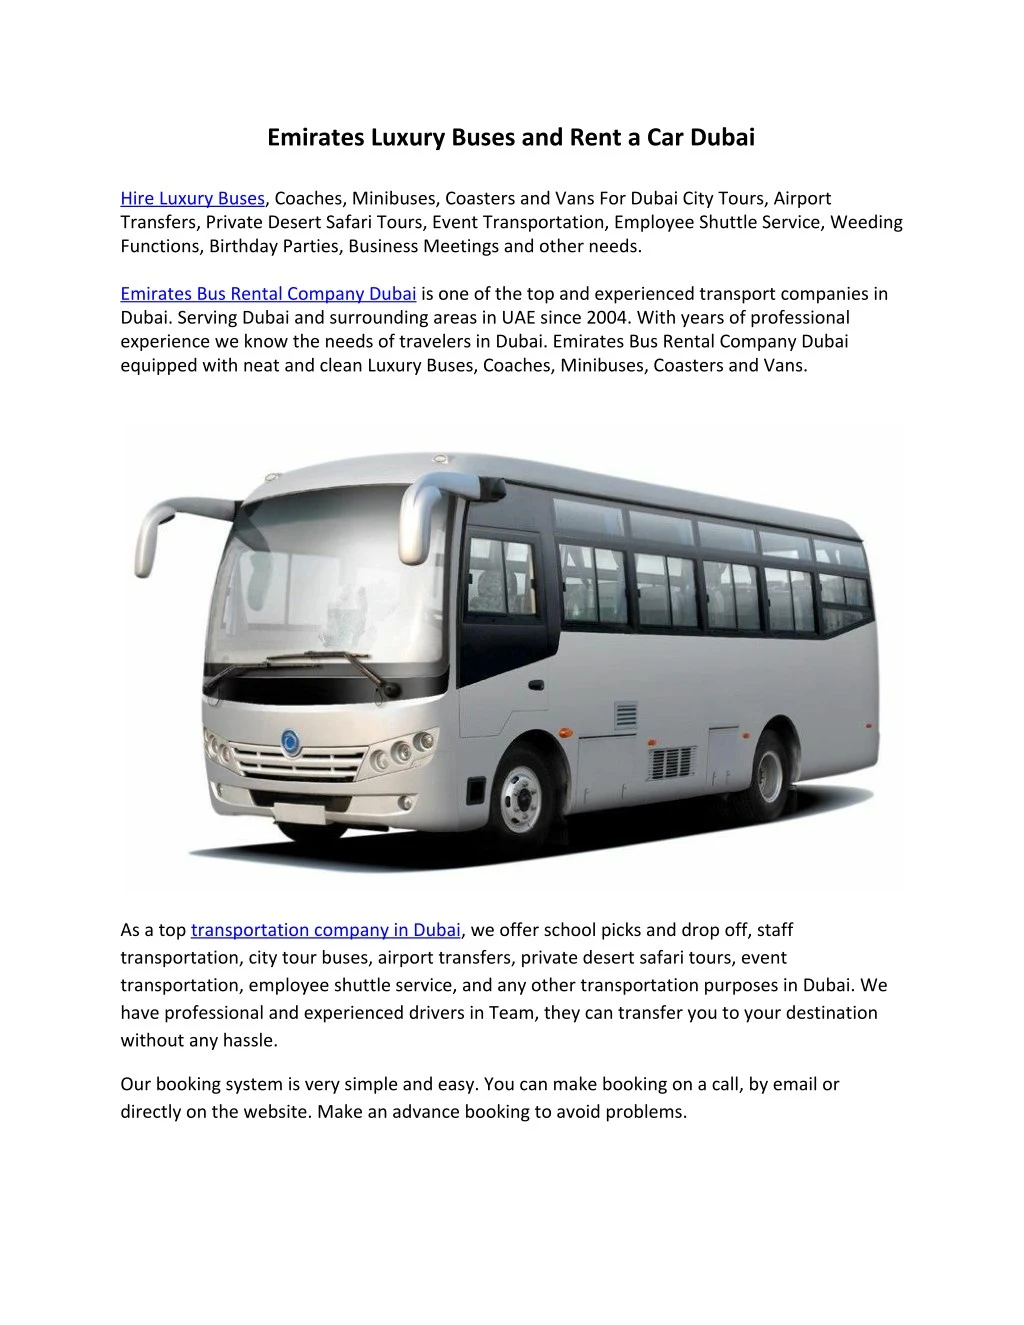 emirates luxury buses and rent a car dubai hire